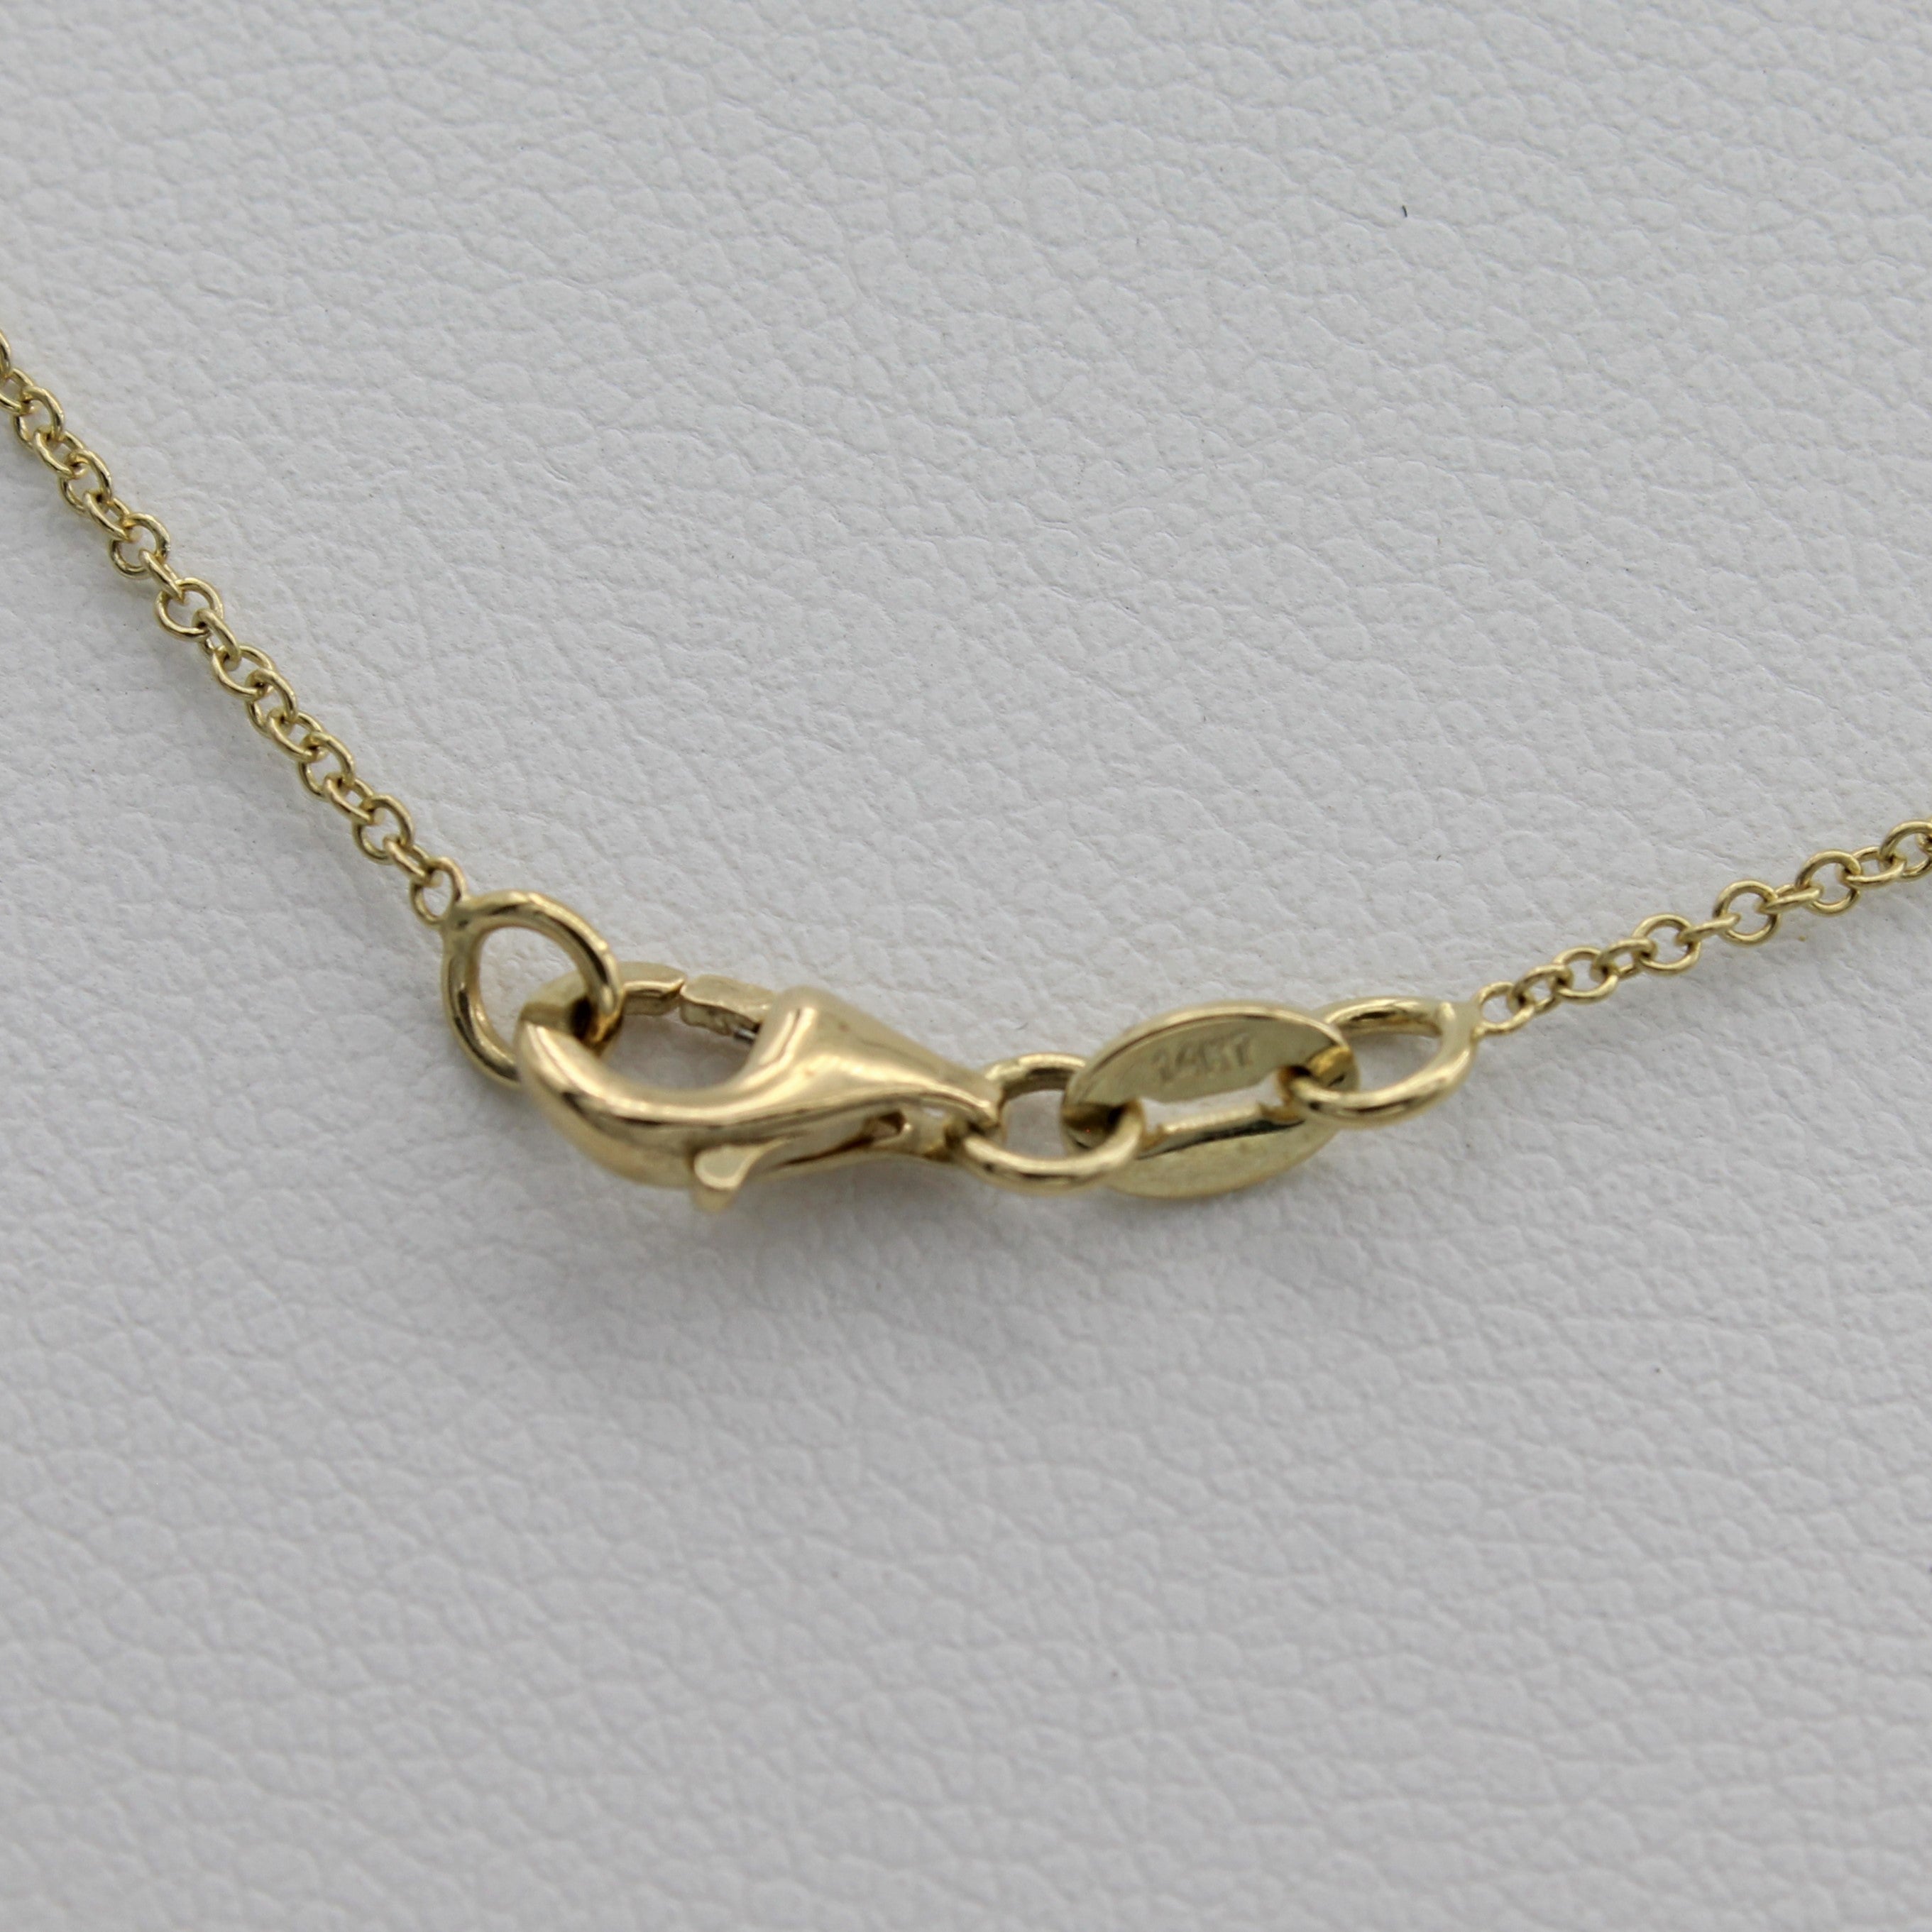 14k Yellow Gold Lightning Bolt Five Station Necklace, close-up of the necklace's lobster clasp closure. 